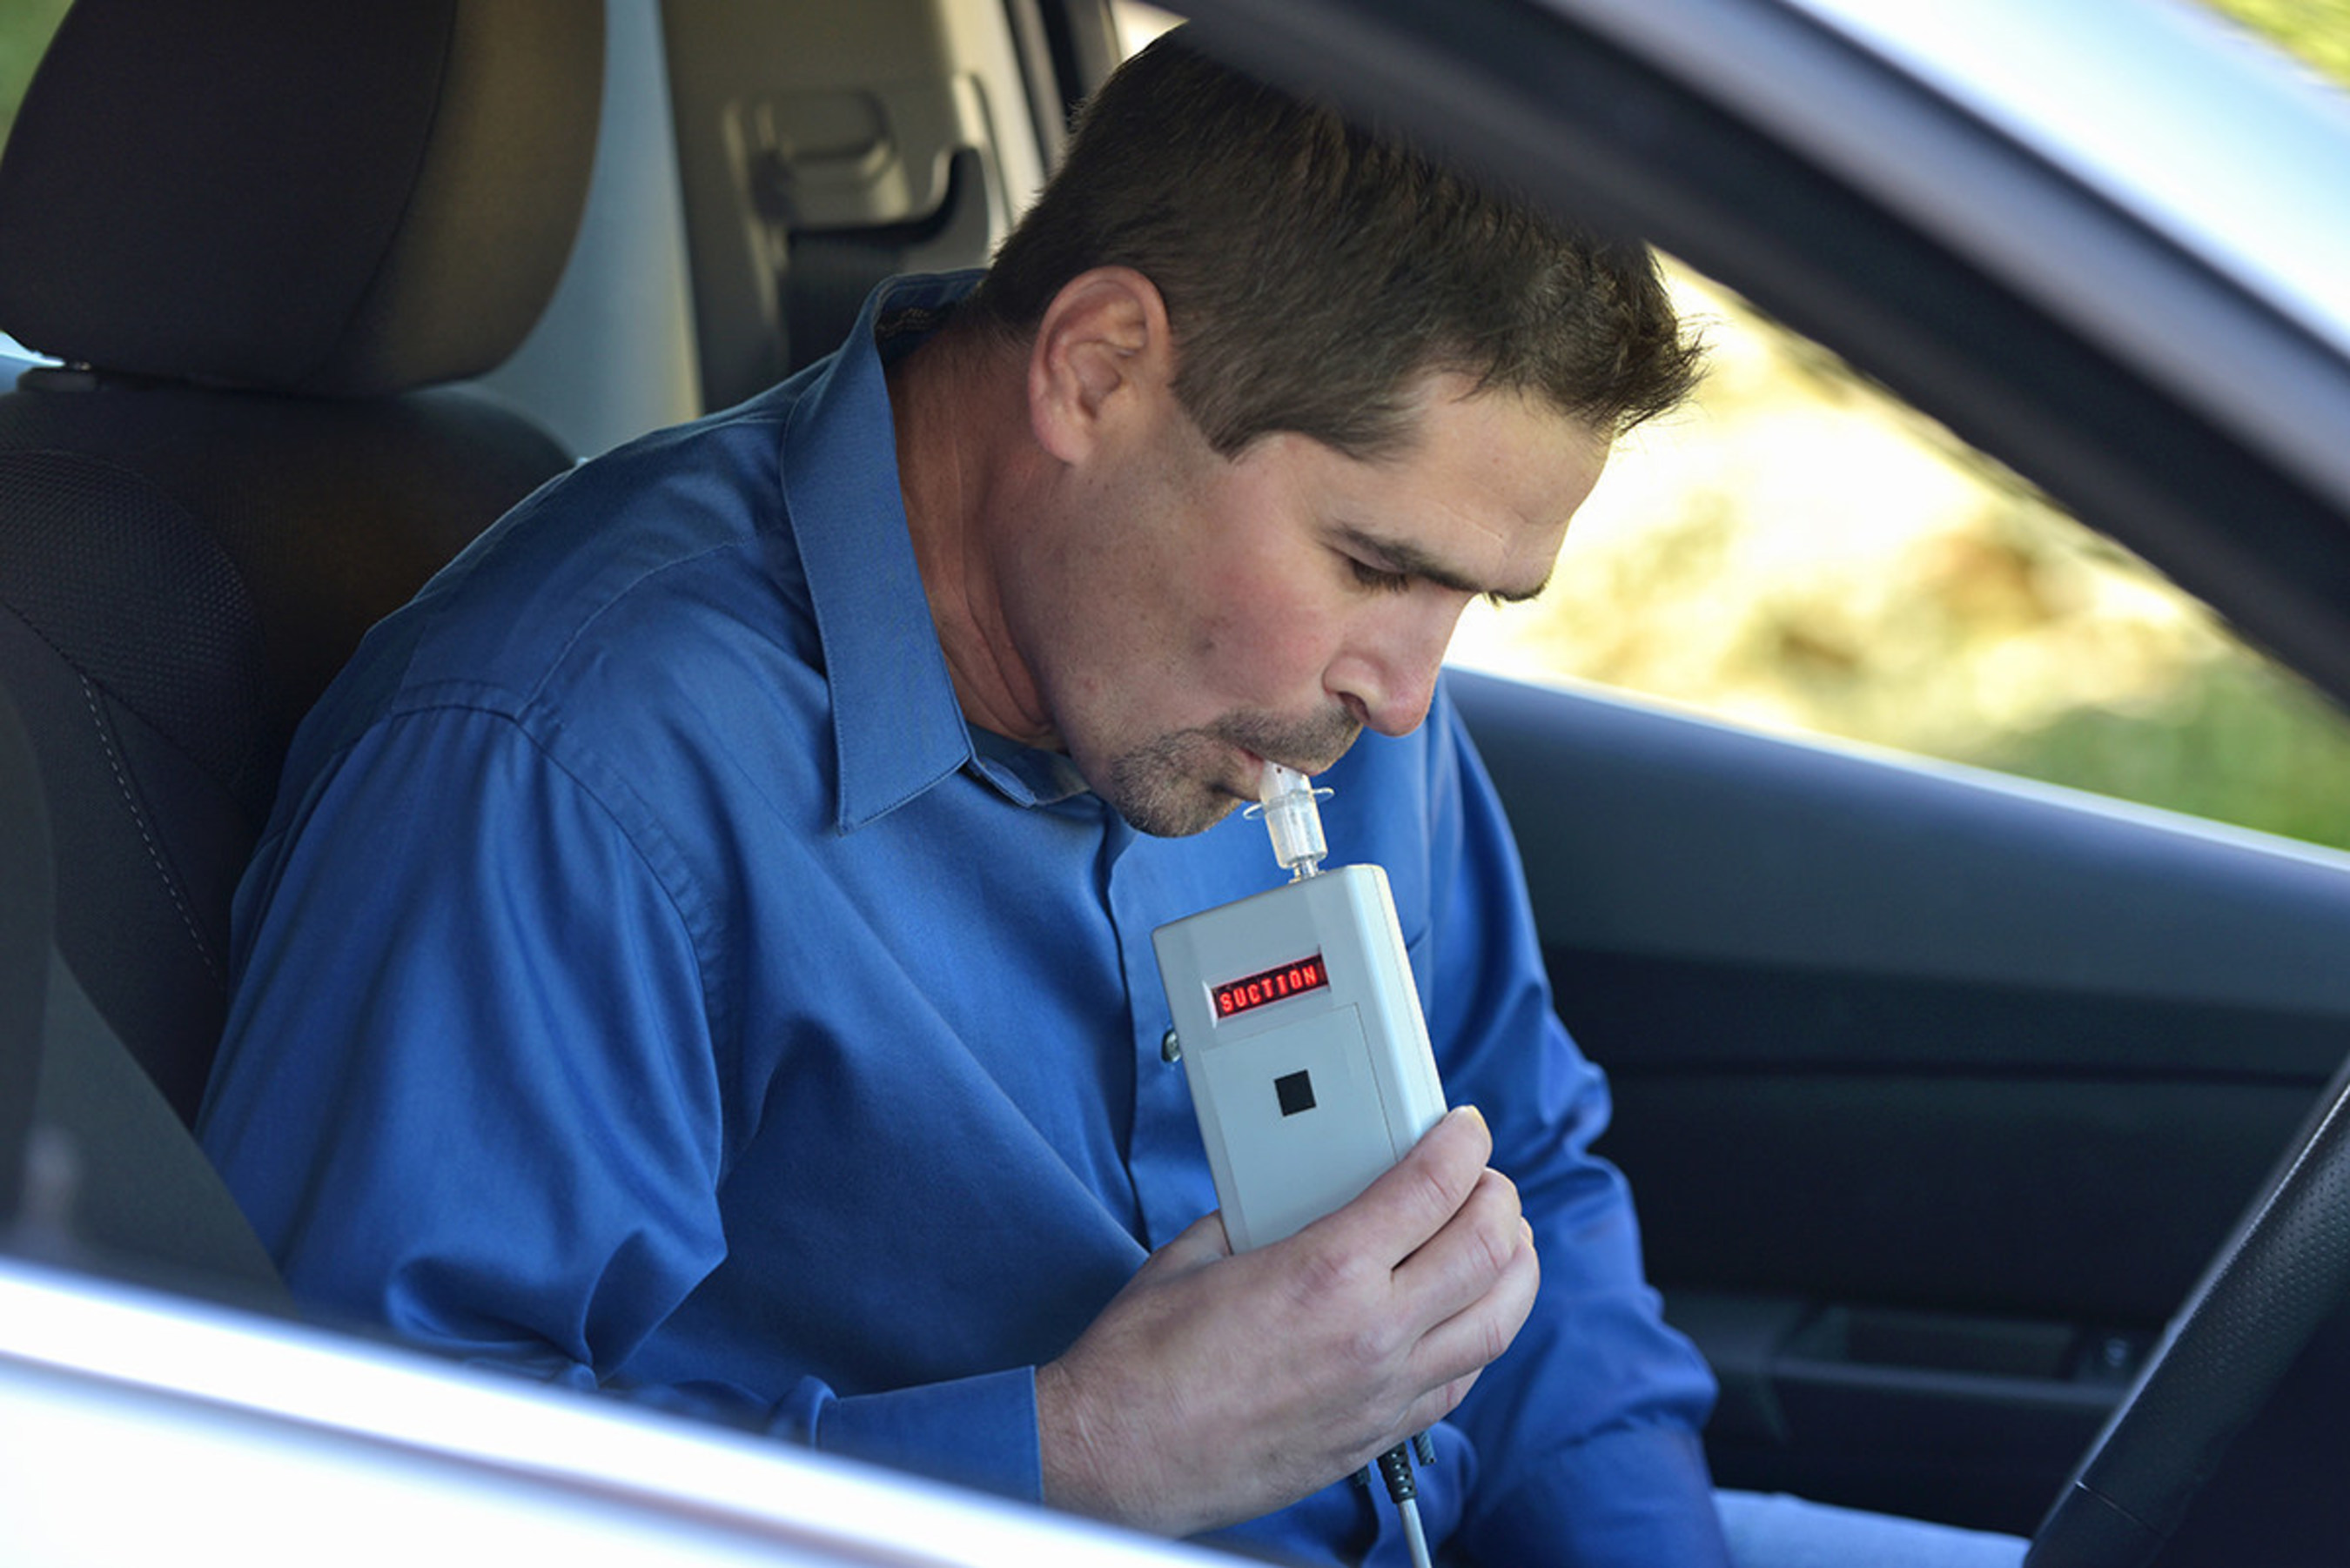 Intoxalock Is Now Certified To Install Ignition Interlock Devices